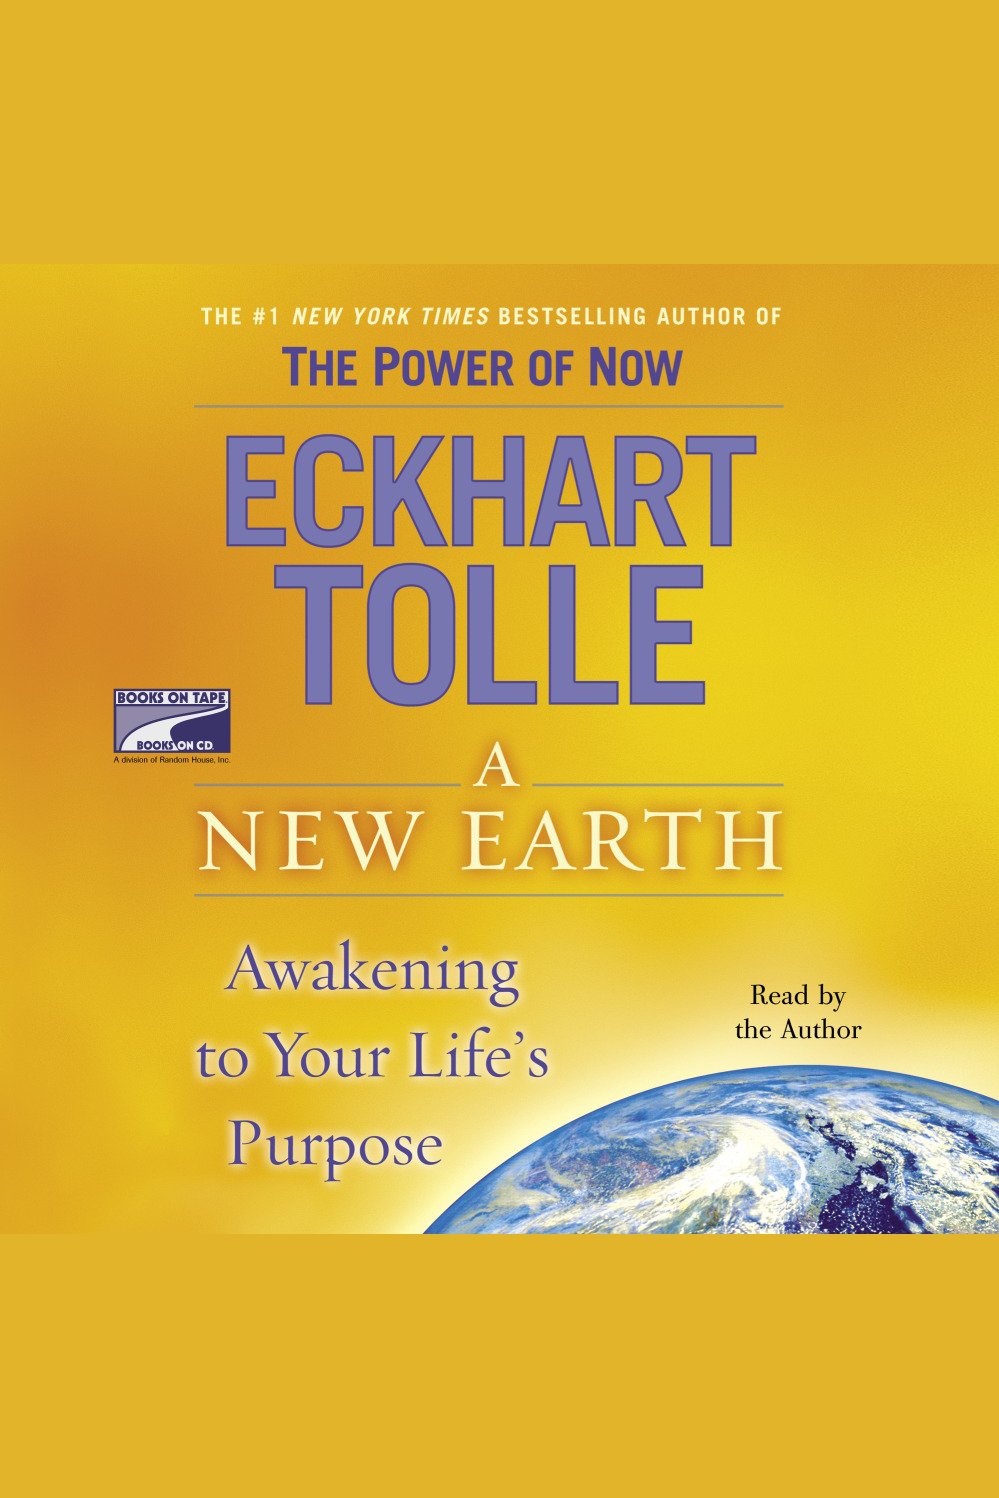 A new earth awakening to your life's purpose cover image